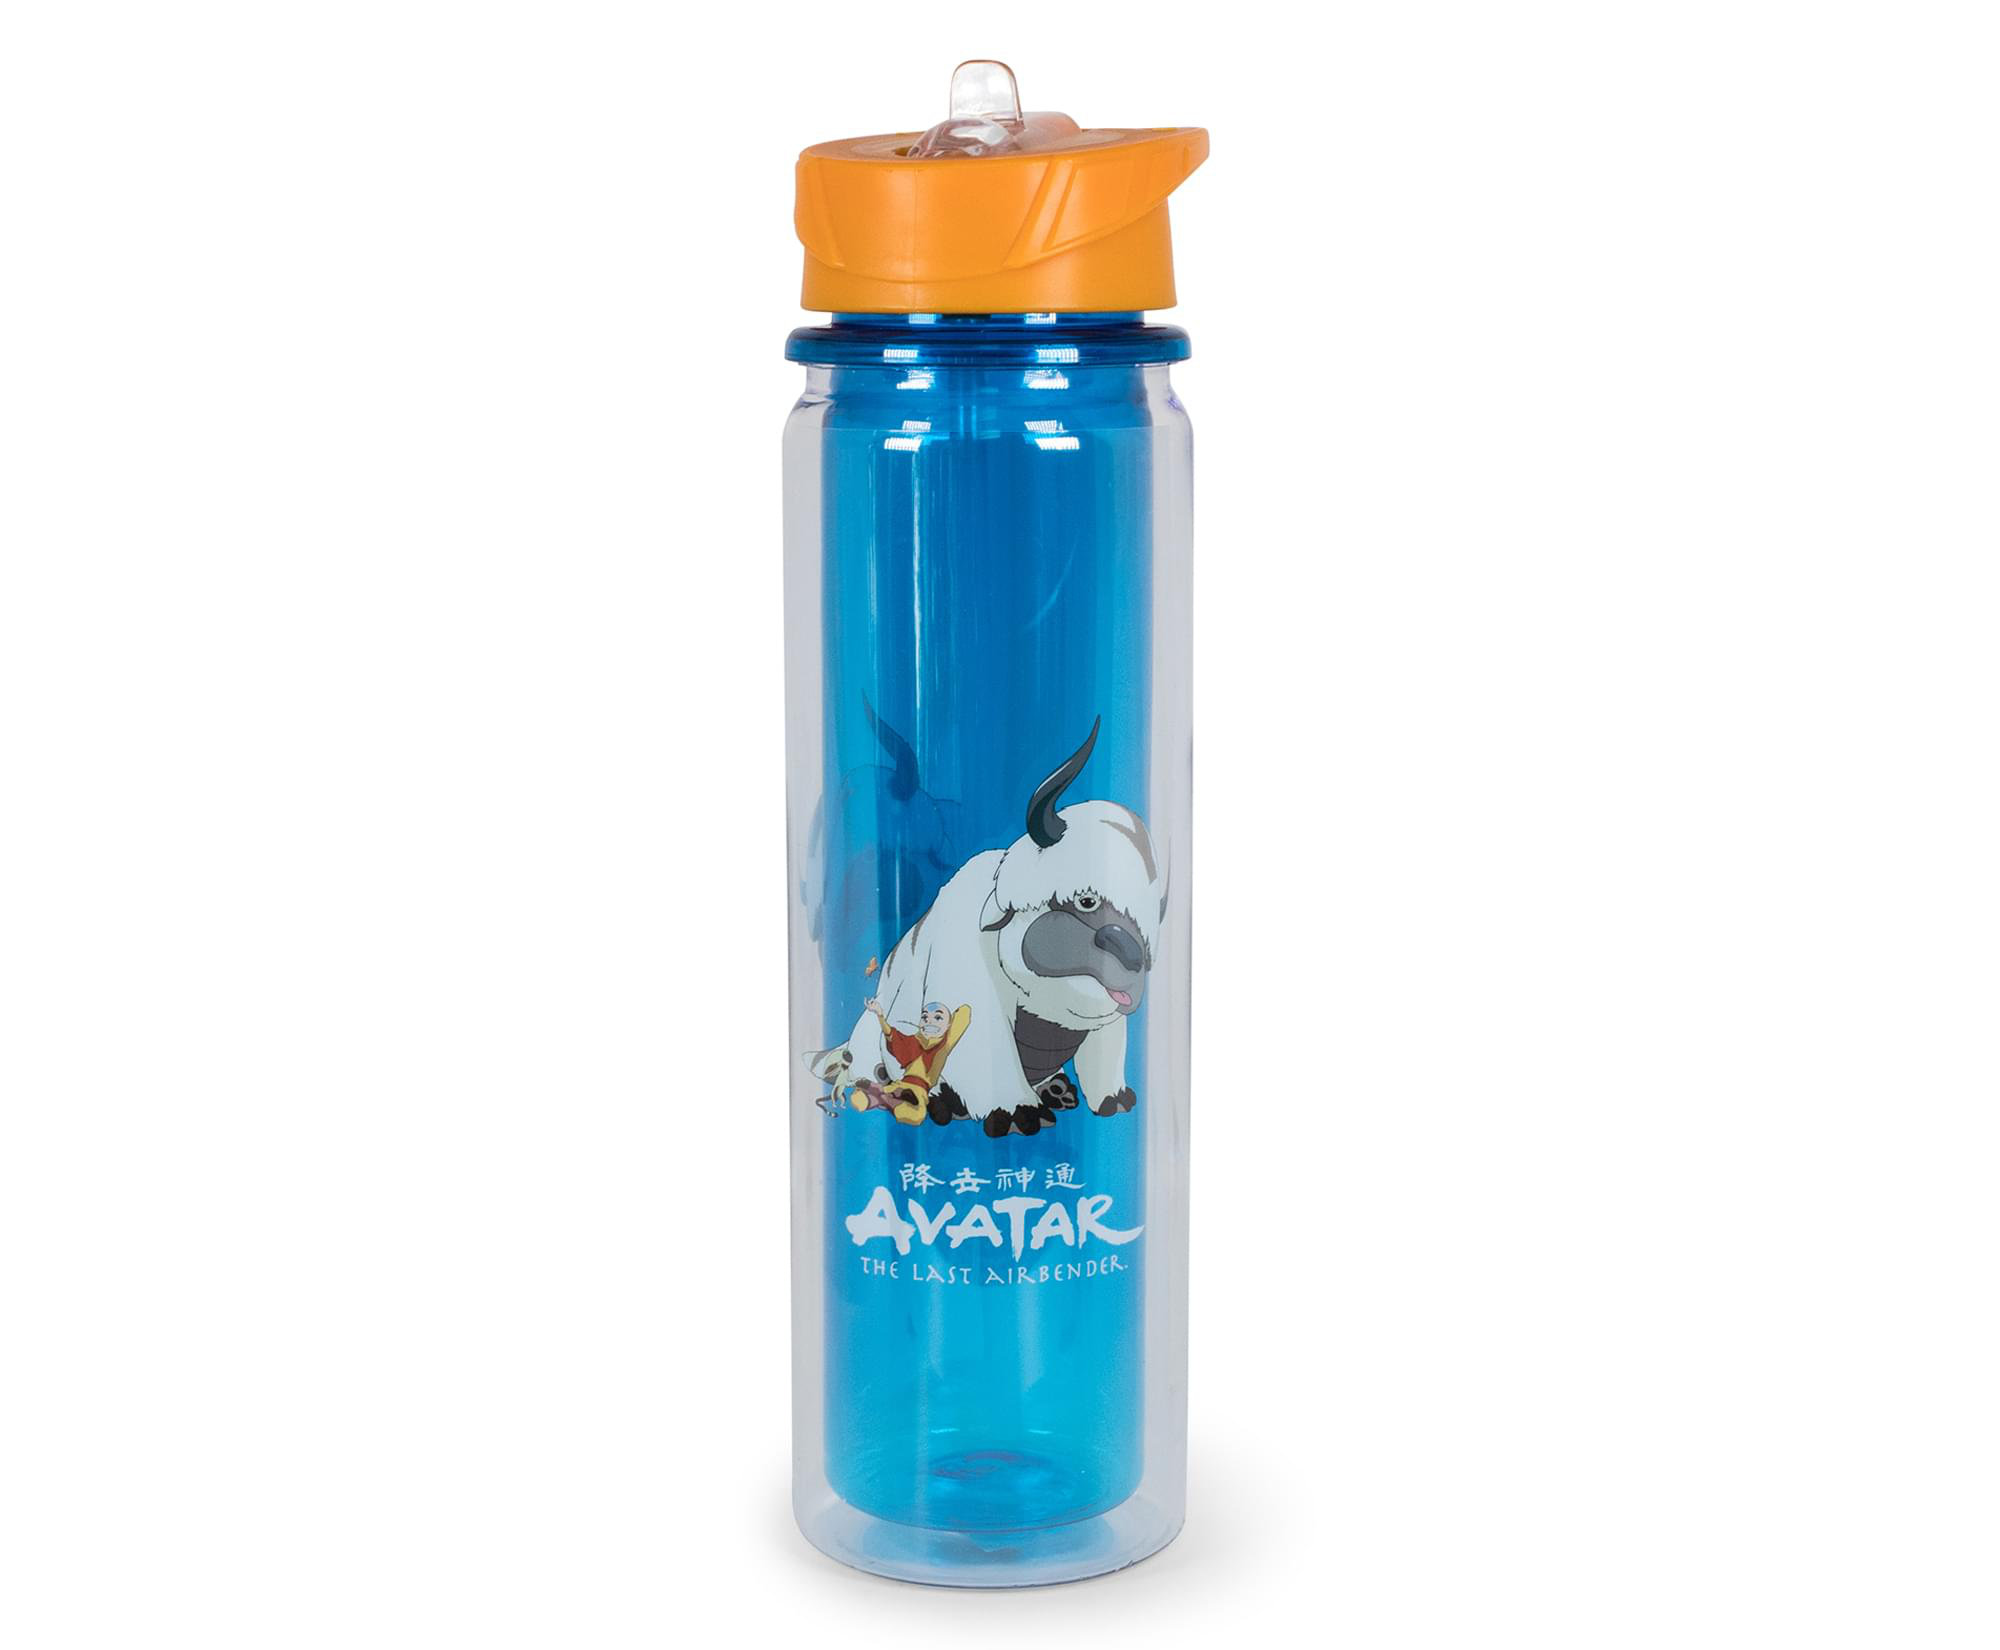 Sonic the Hedgehog Inspired Water Bottle. Great Idea for Kids